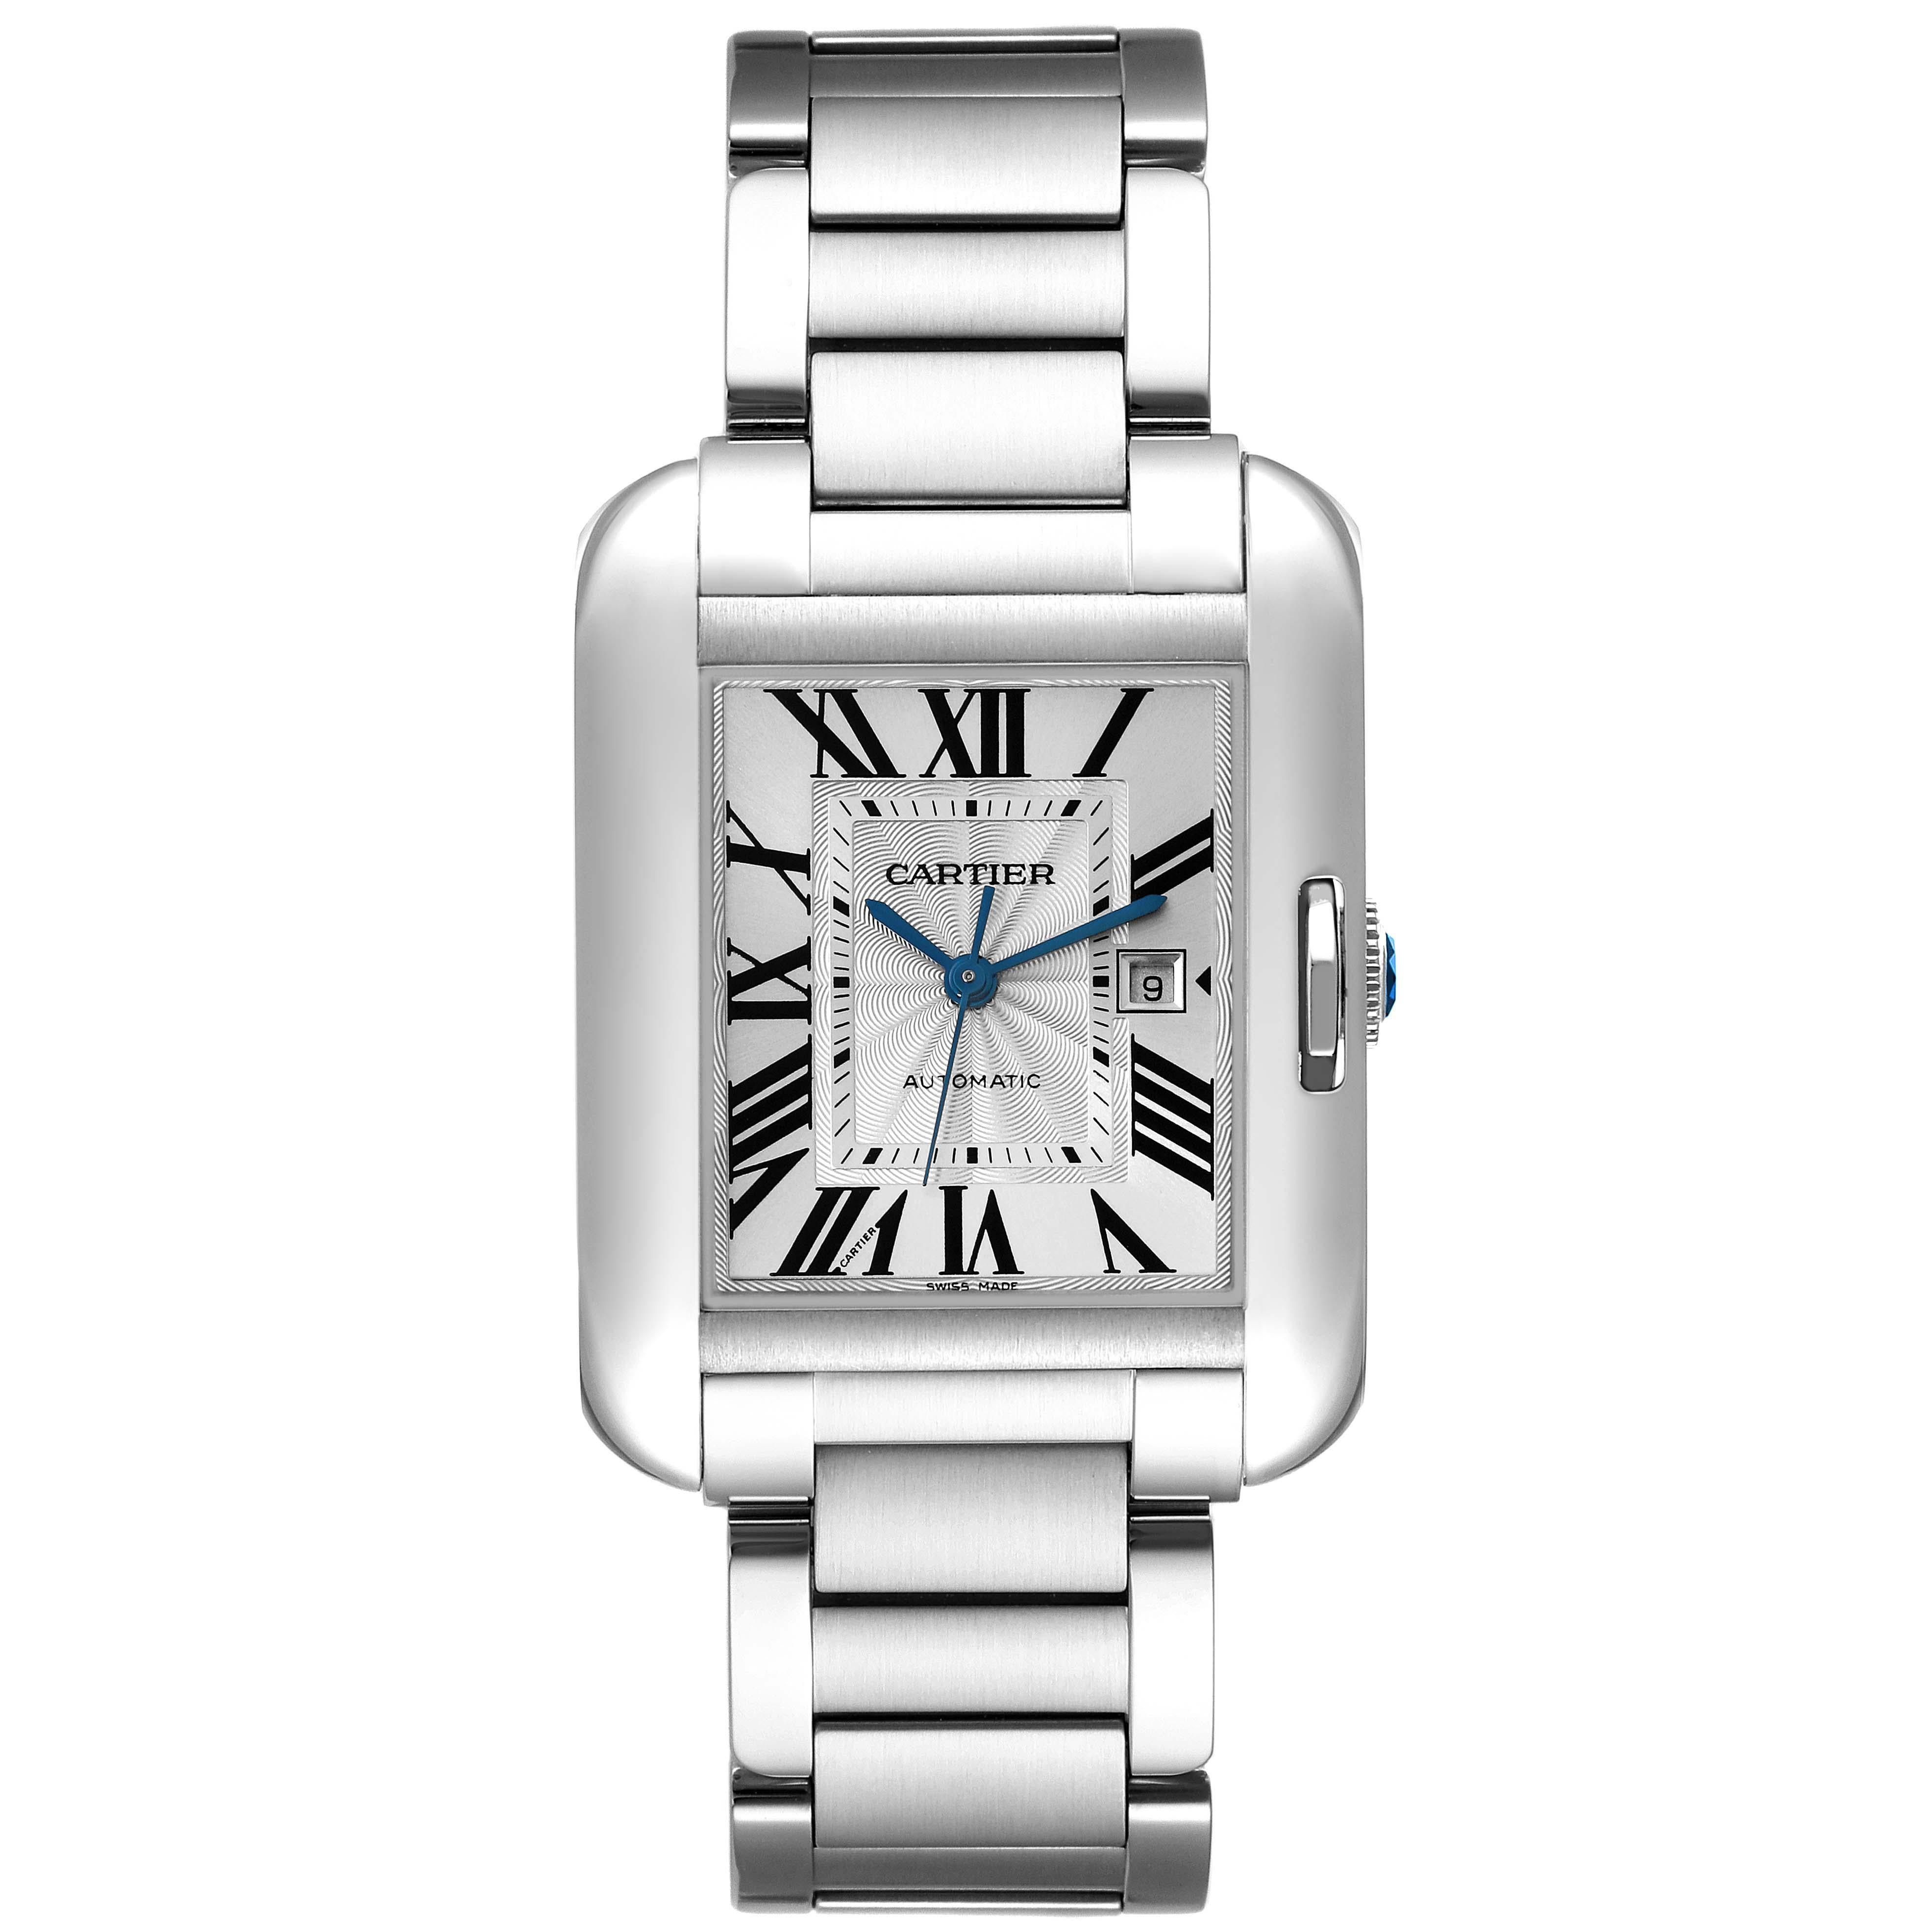 Cartier Tank Anglaise Large Steel Automatic Mens Watch W5310009. Automatic self-winding movement. Stainless steel rectangle case 39.2 mm x 29.8 mm. Case thickness: 9.5 mm. Crown set with a faceted blue spinel. . Scratch resistant sapphire crystal.